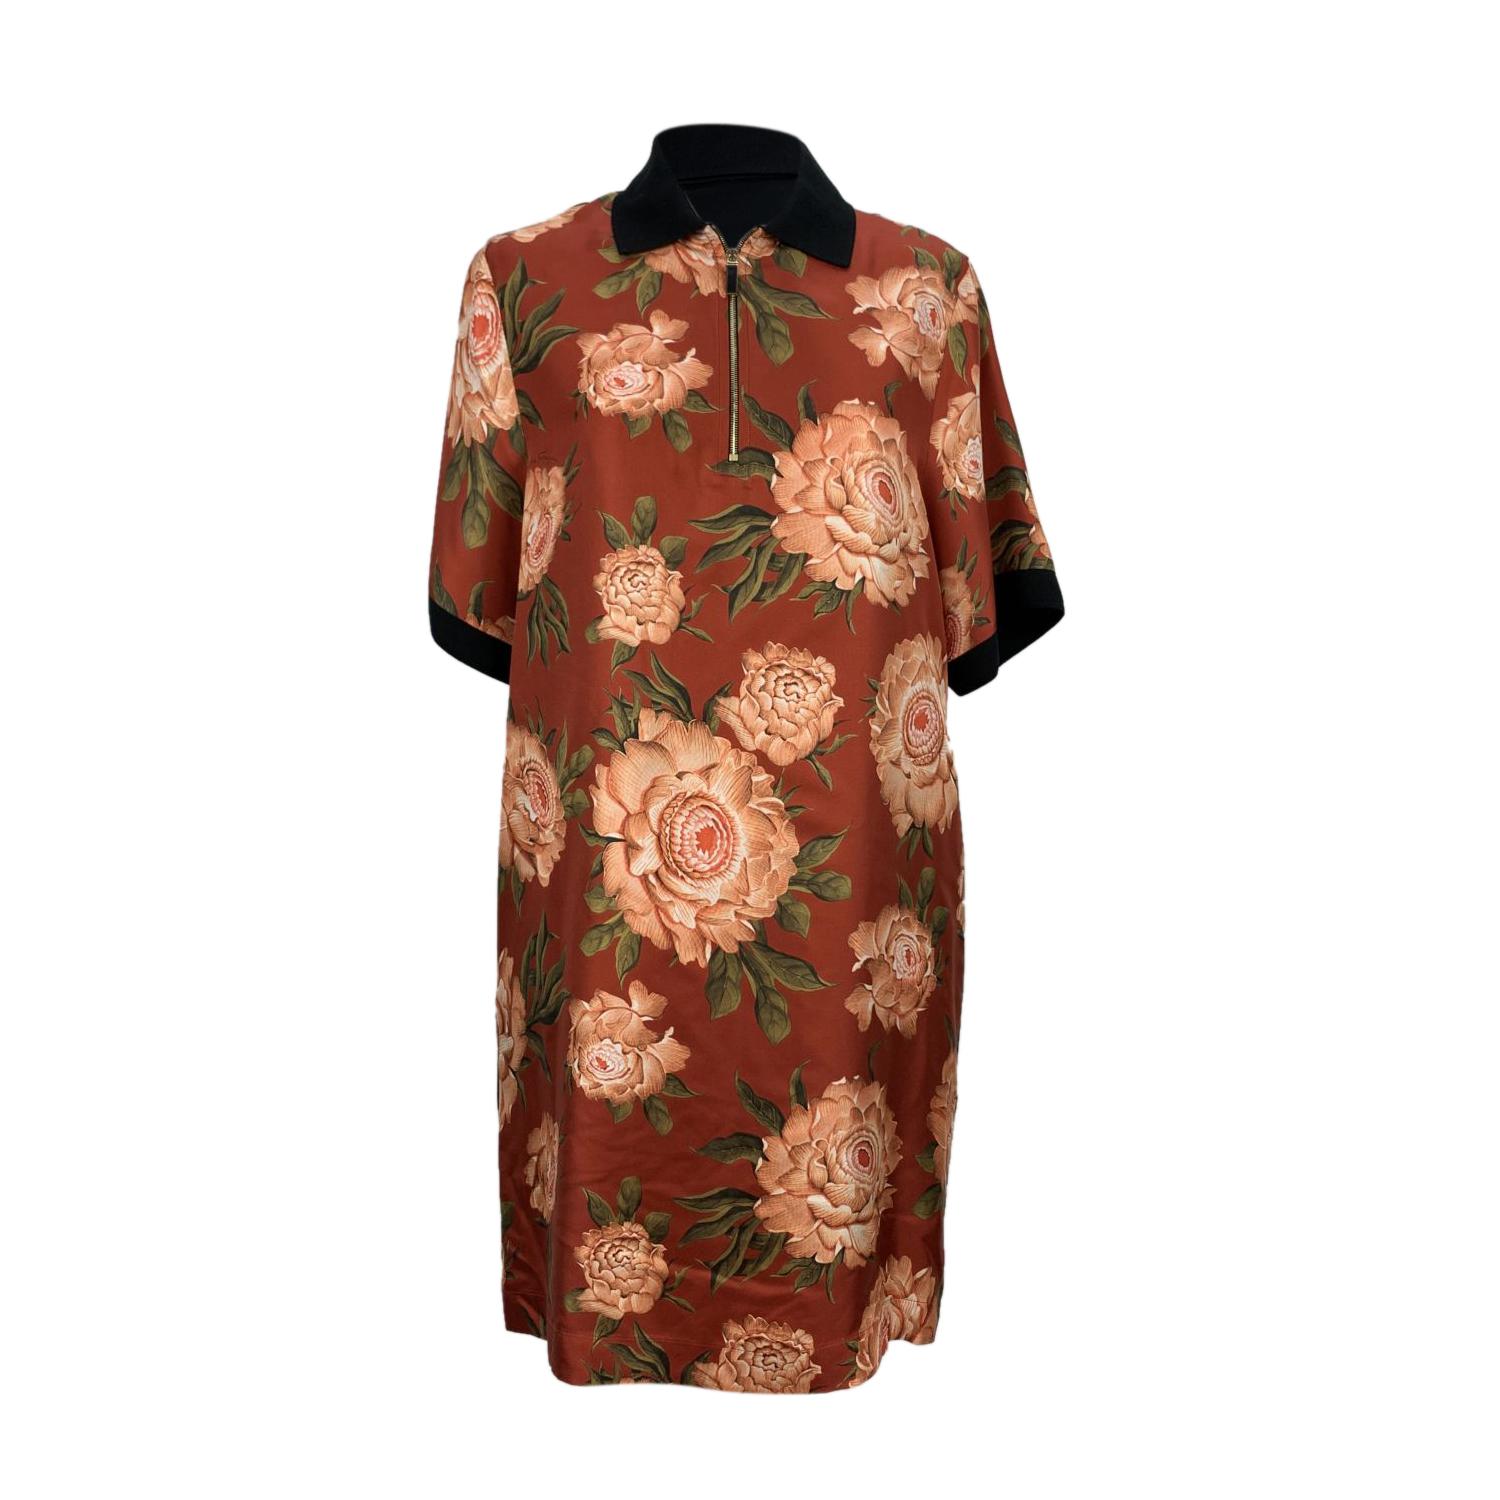 Salvatore Ferragamo silk twill and cotton t-shirt dress. It features a front silk panel with peonis pattern, collared neckline, front zip and short sleeve styling. Composition: 100% silk - 100% cotton. Size: 40 IT (The size shown for this item is